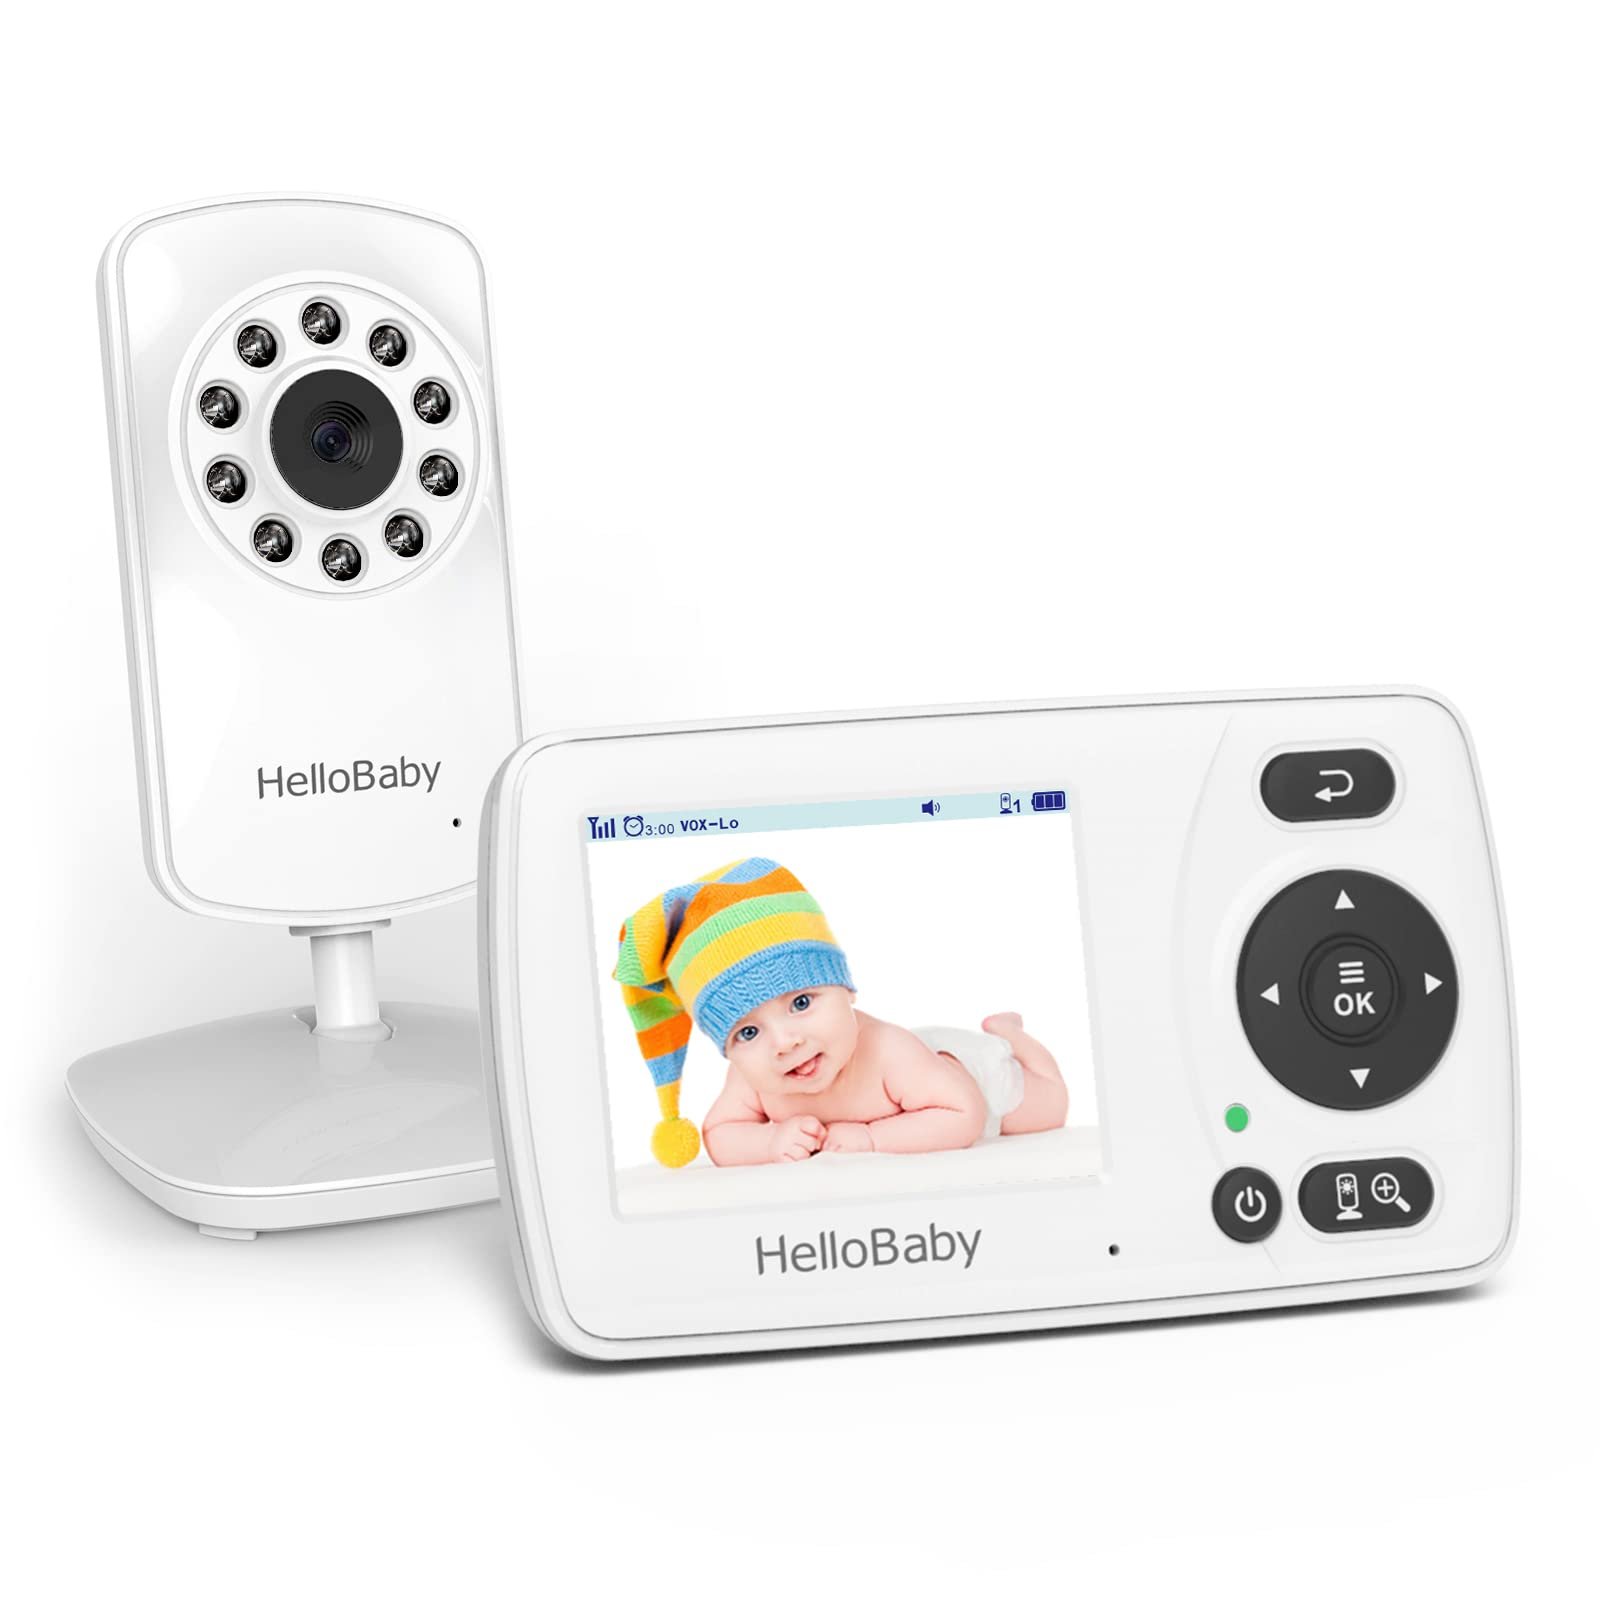 HelloBaby Baby Monitor-HB6550 5 Video Baby Monitor with Remote